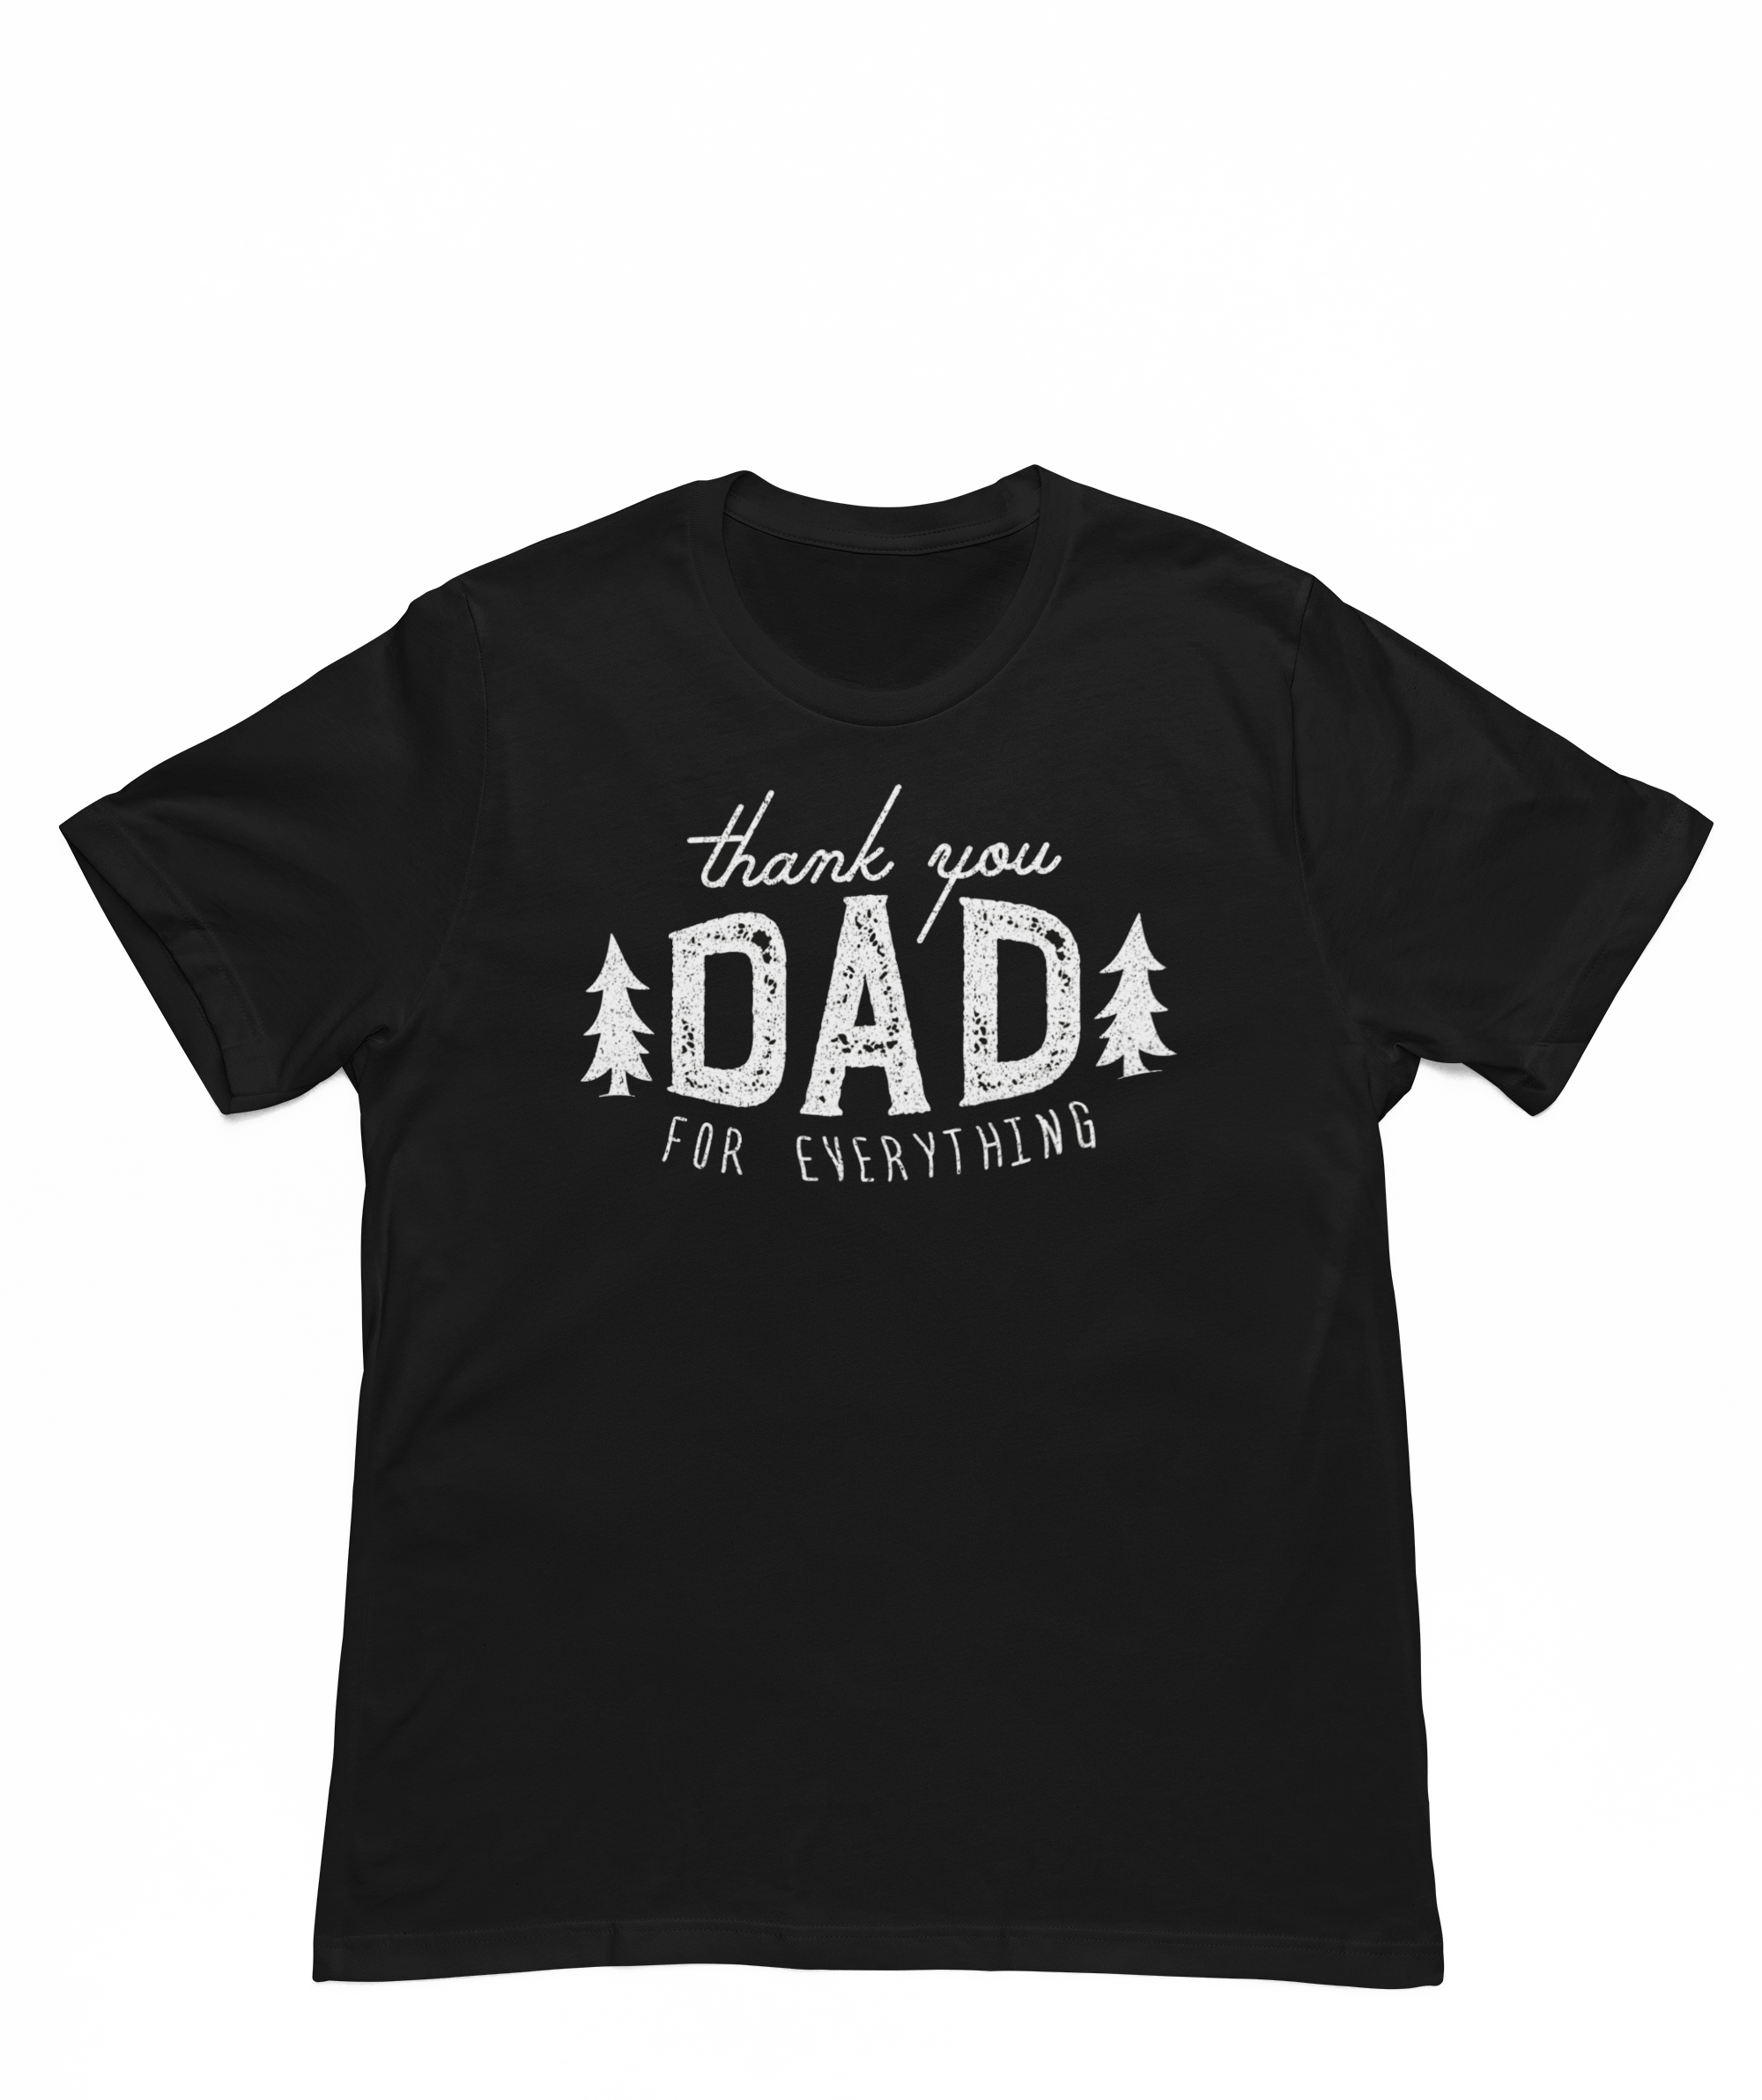 Thank you Dad t-shirt - Father's Day gift